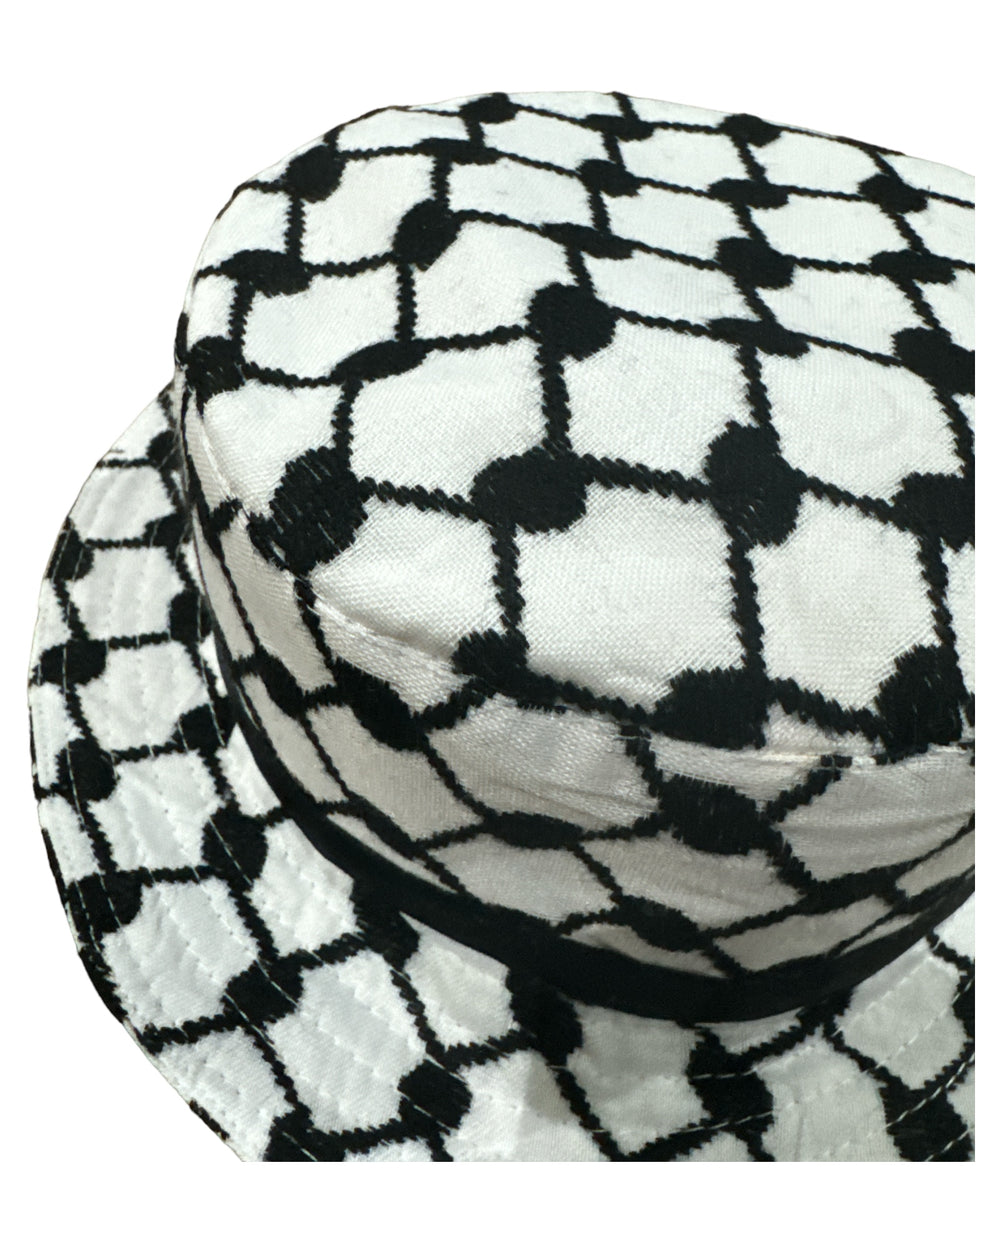 Authentic Keffiyeh Bucket Hats: Tradition Meets Trend